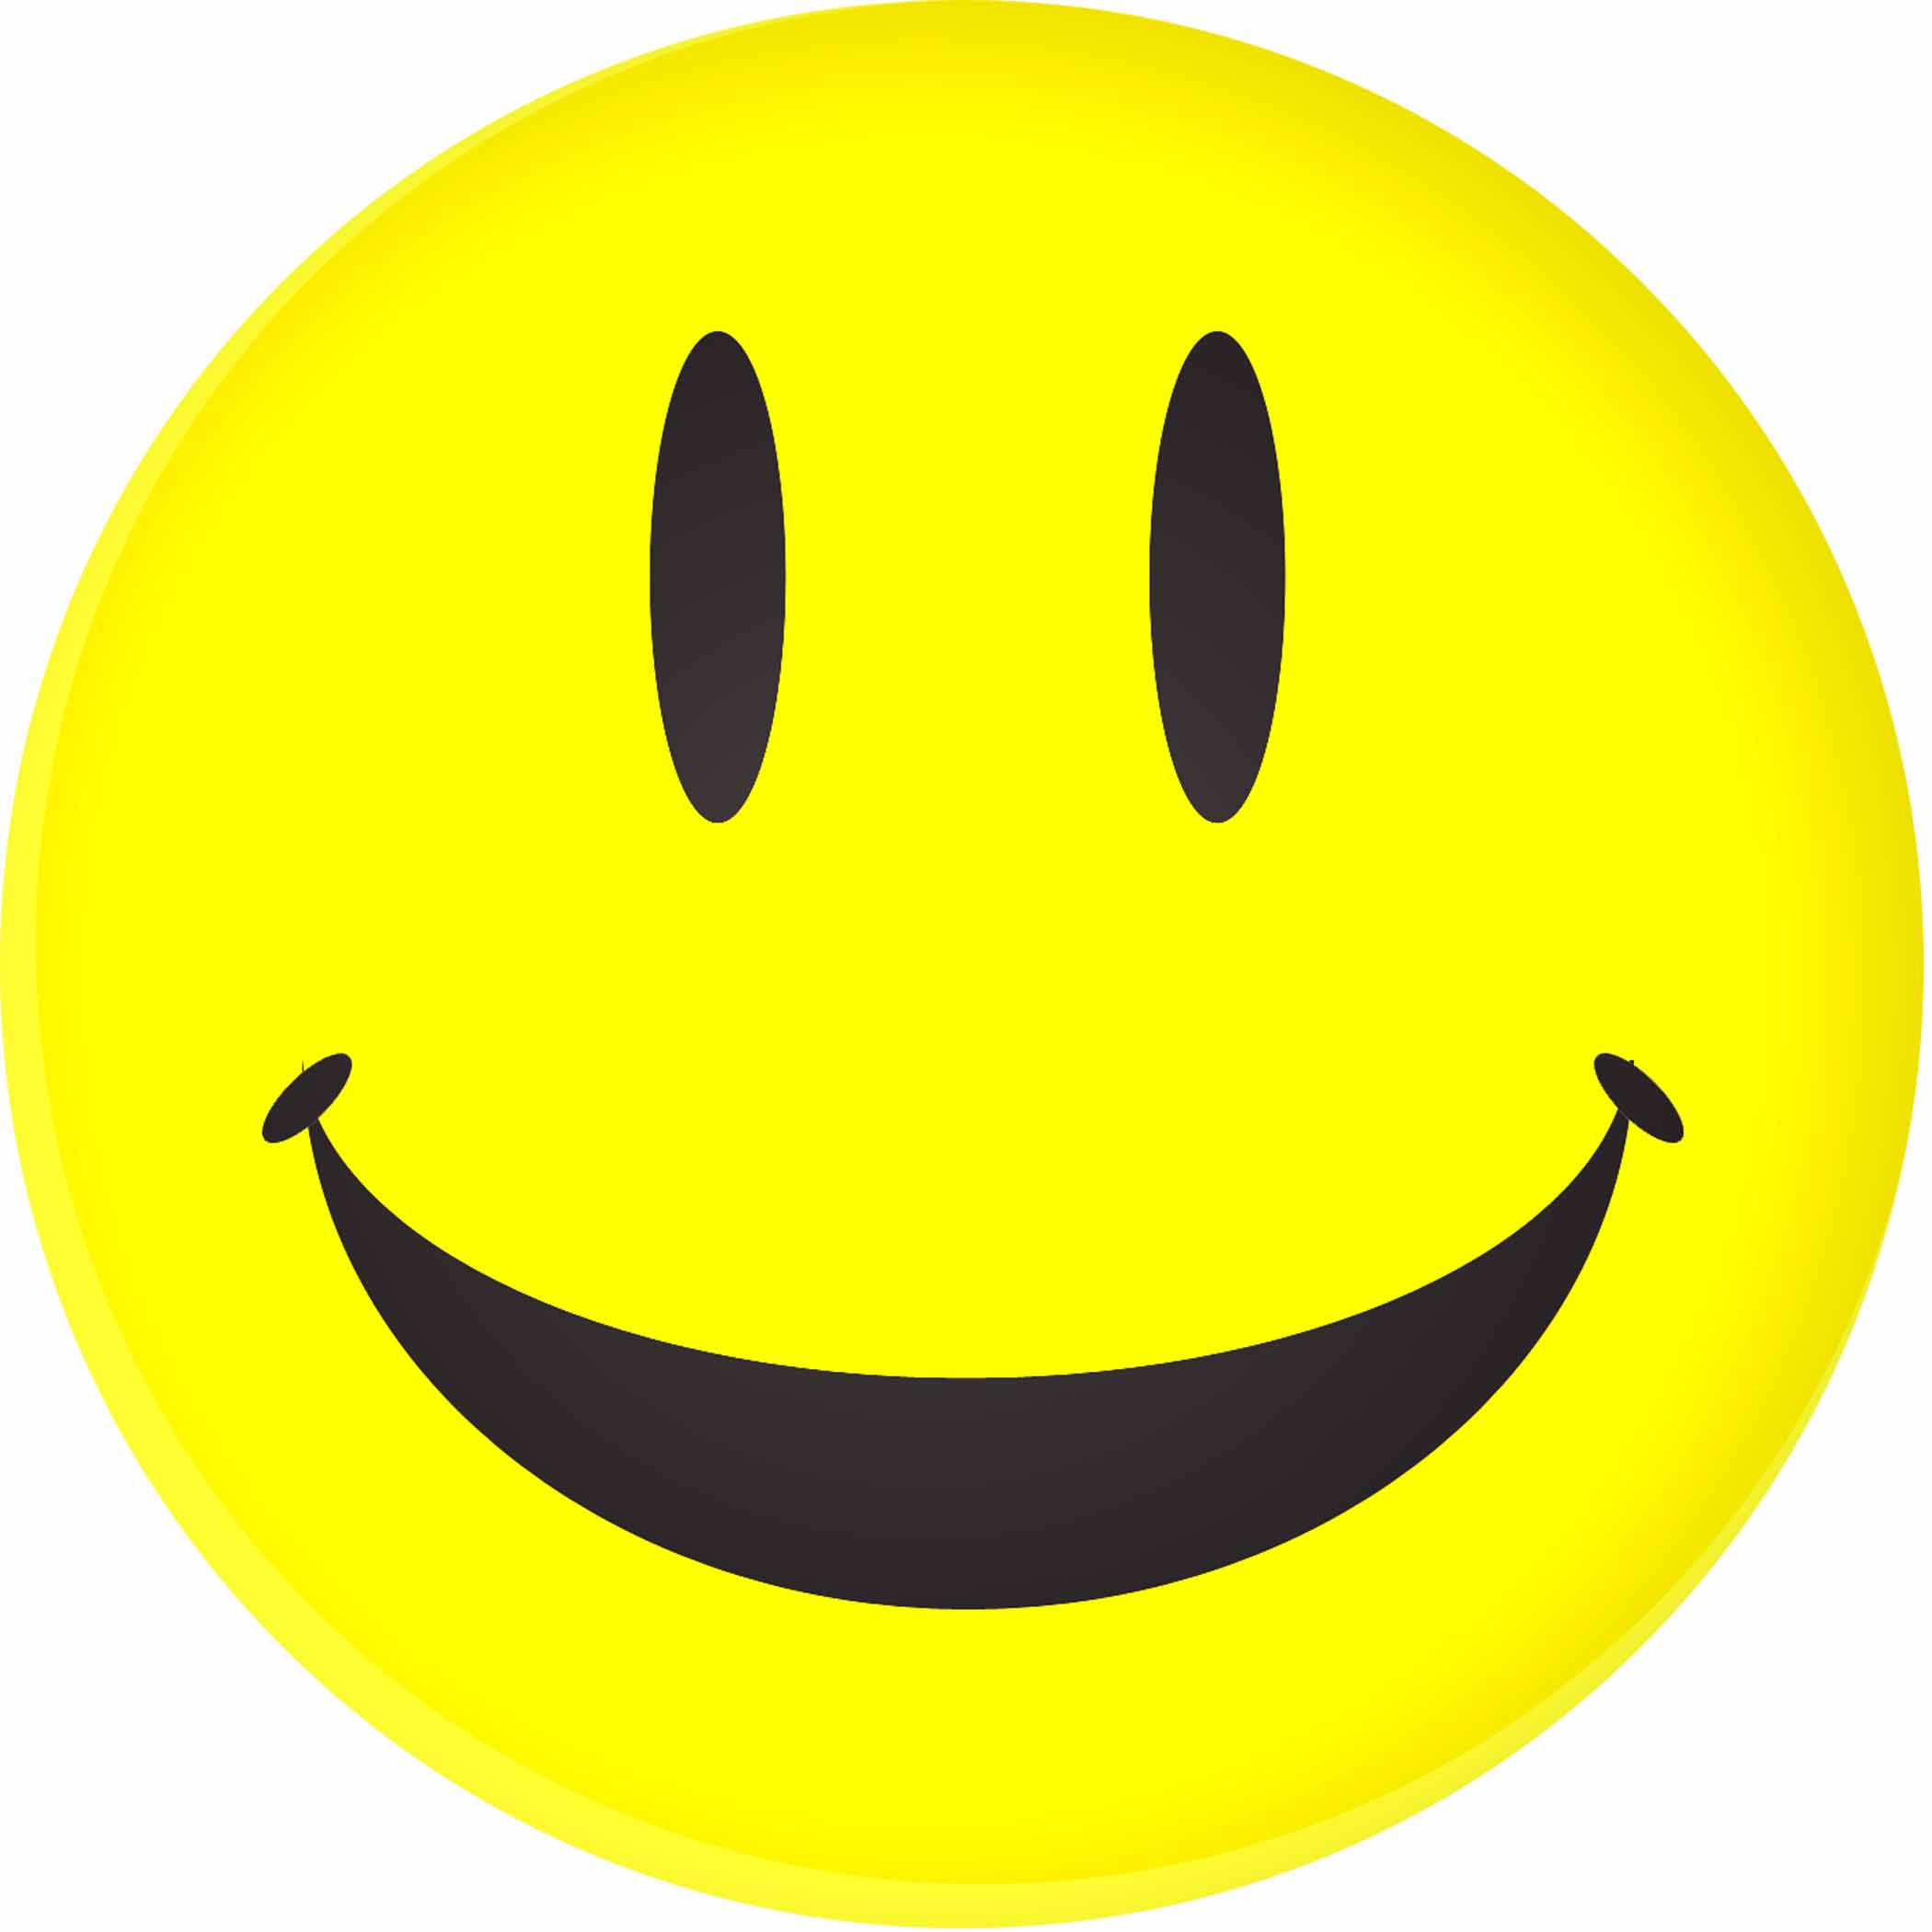 Animated Smiley Face Clip Art